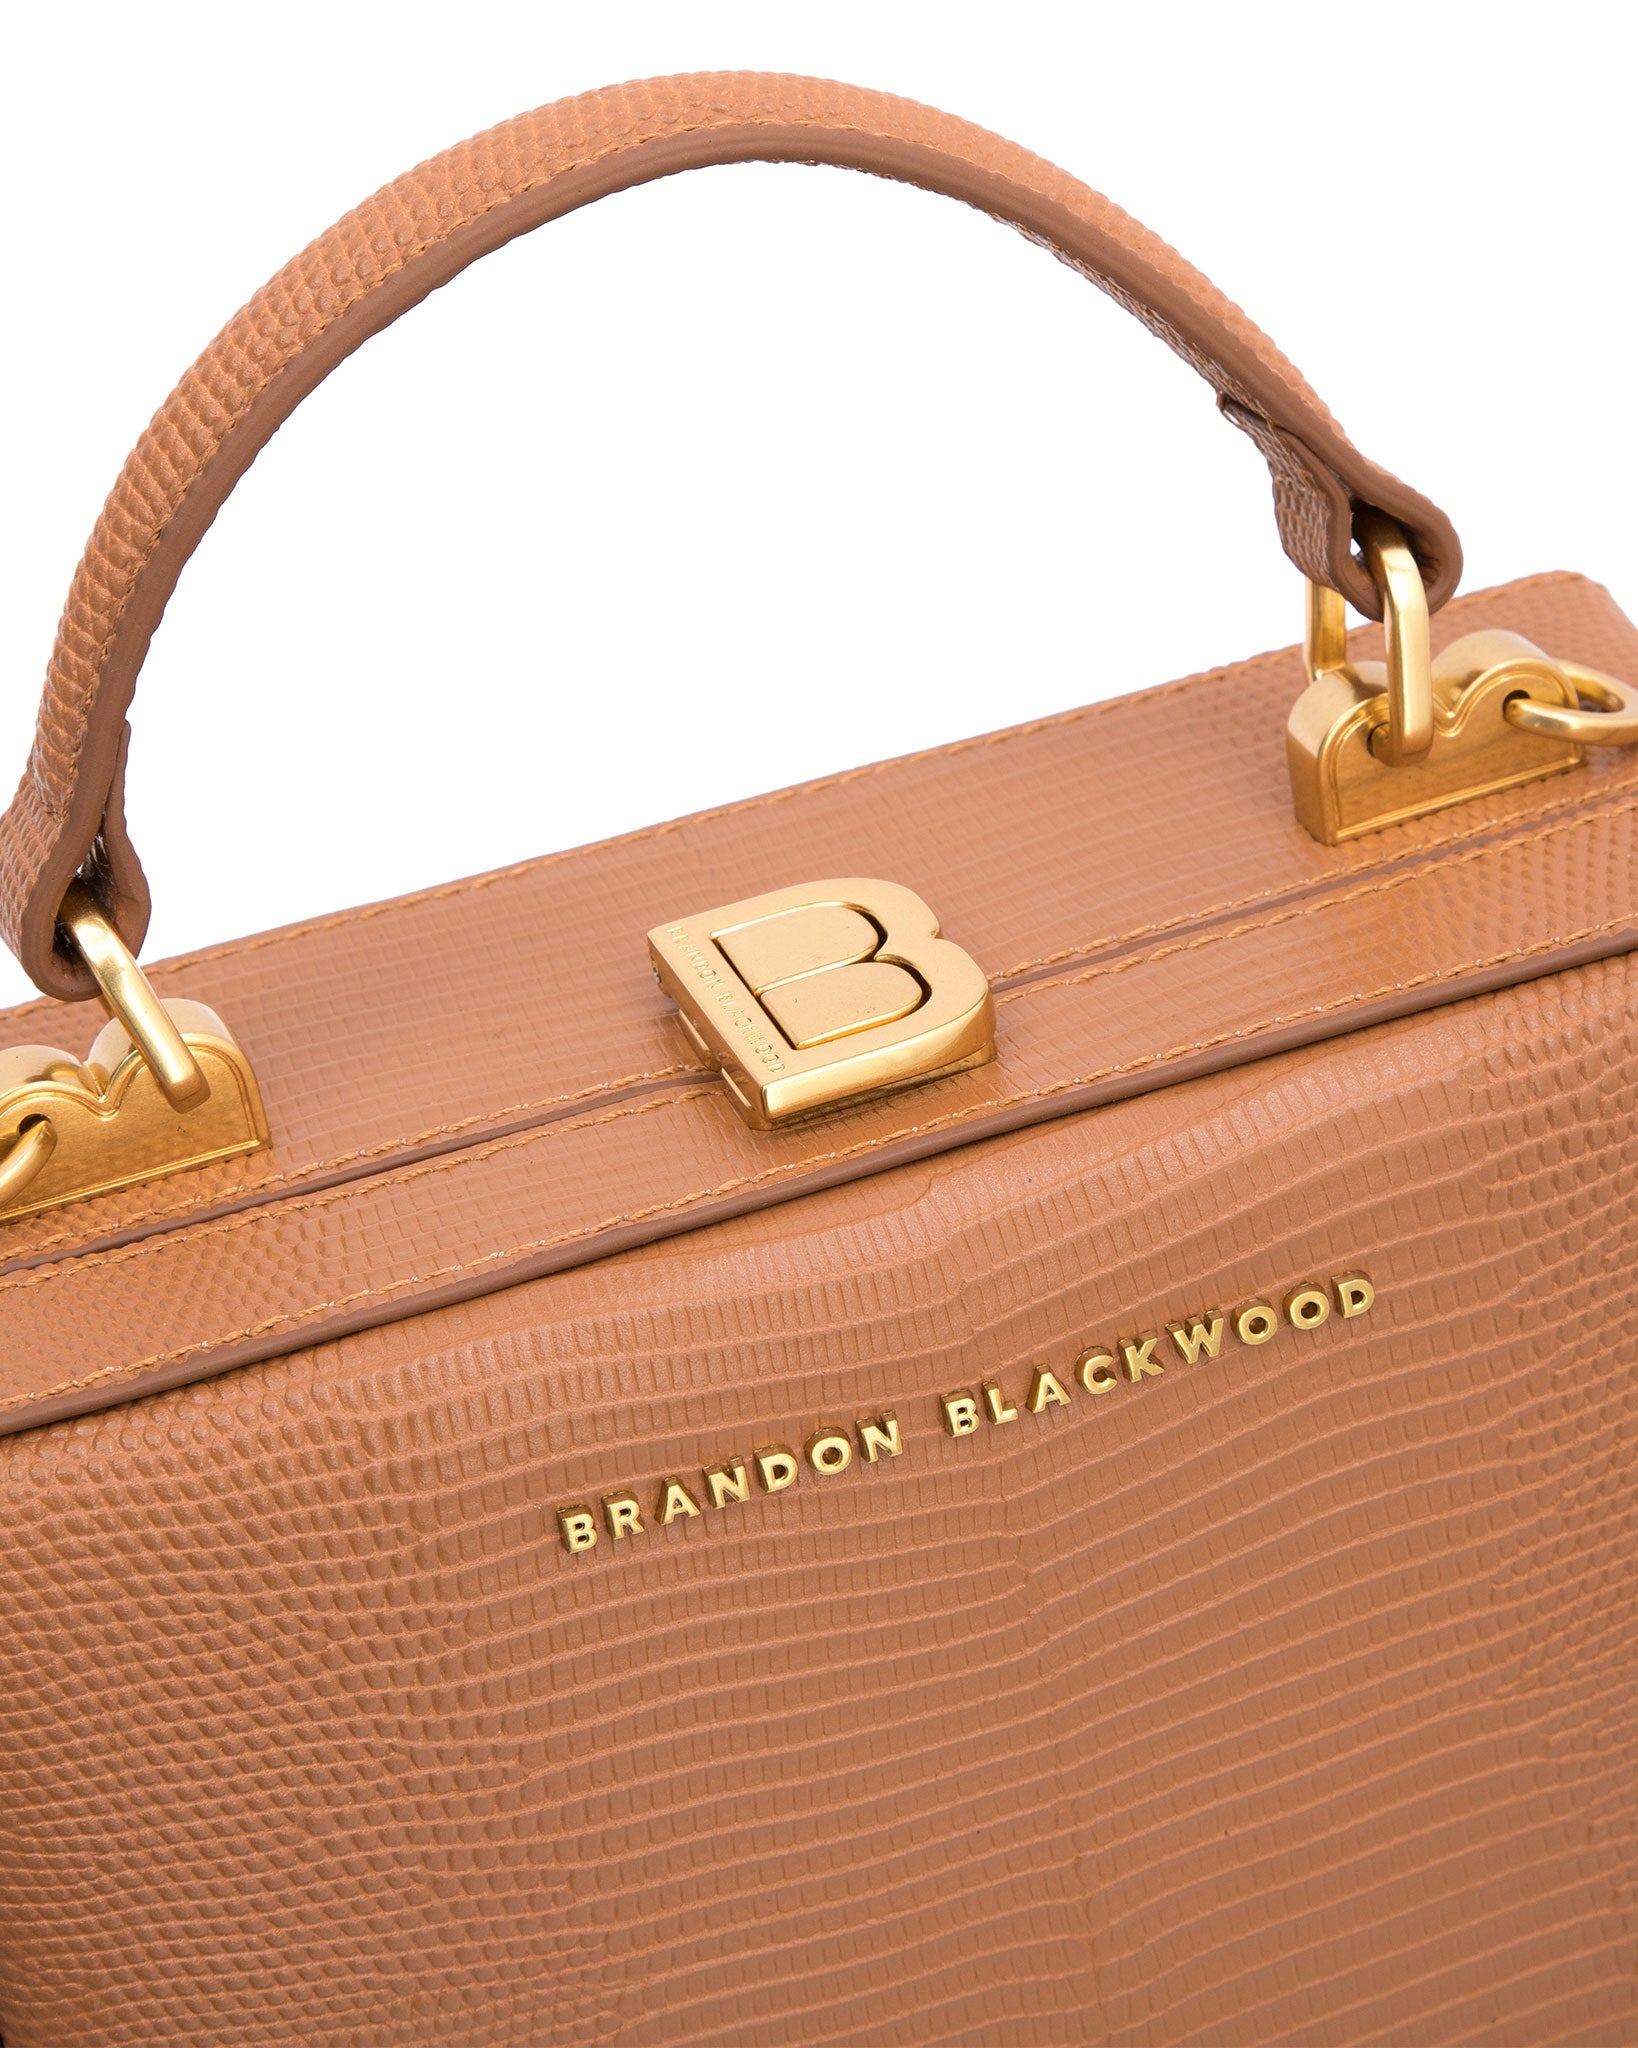 Brandon Blackwood's Trunk Week Is Your Chance To Get 2022's It Bag